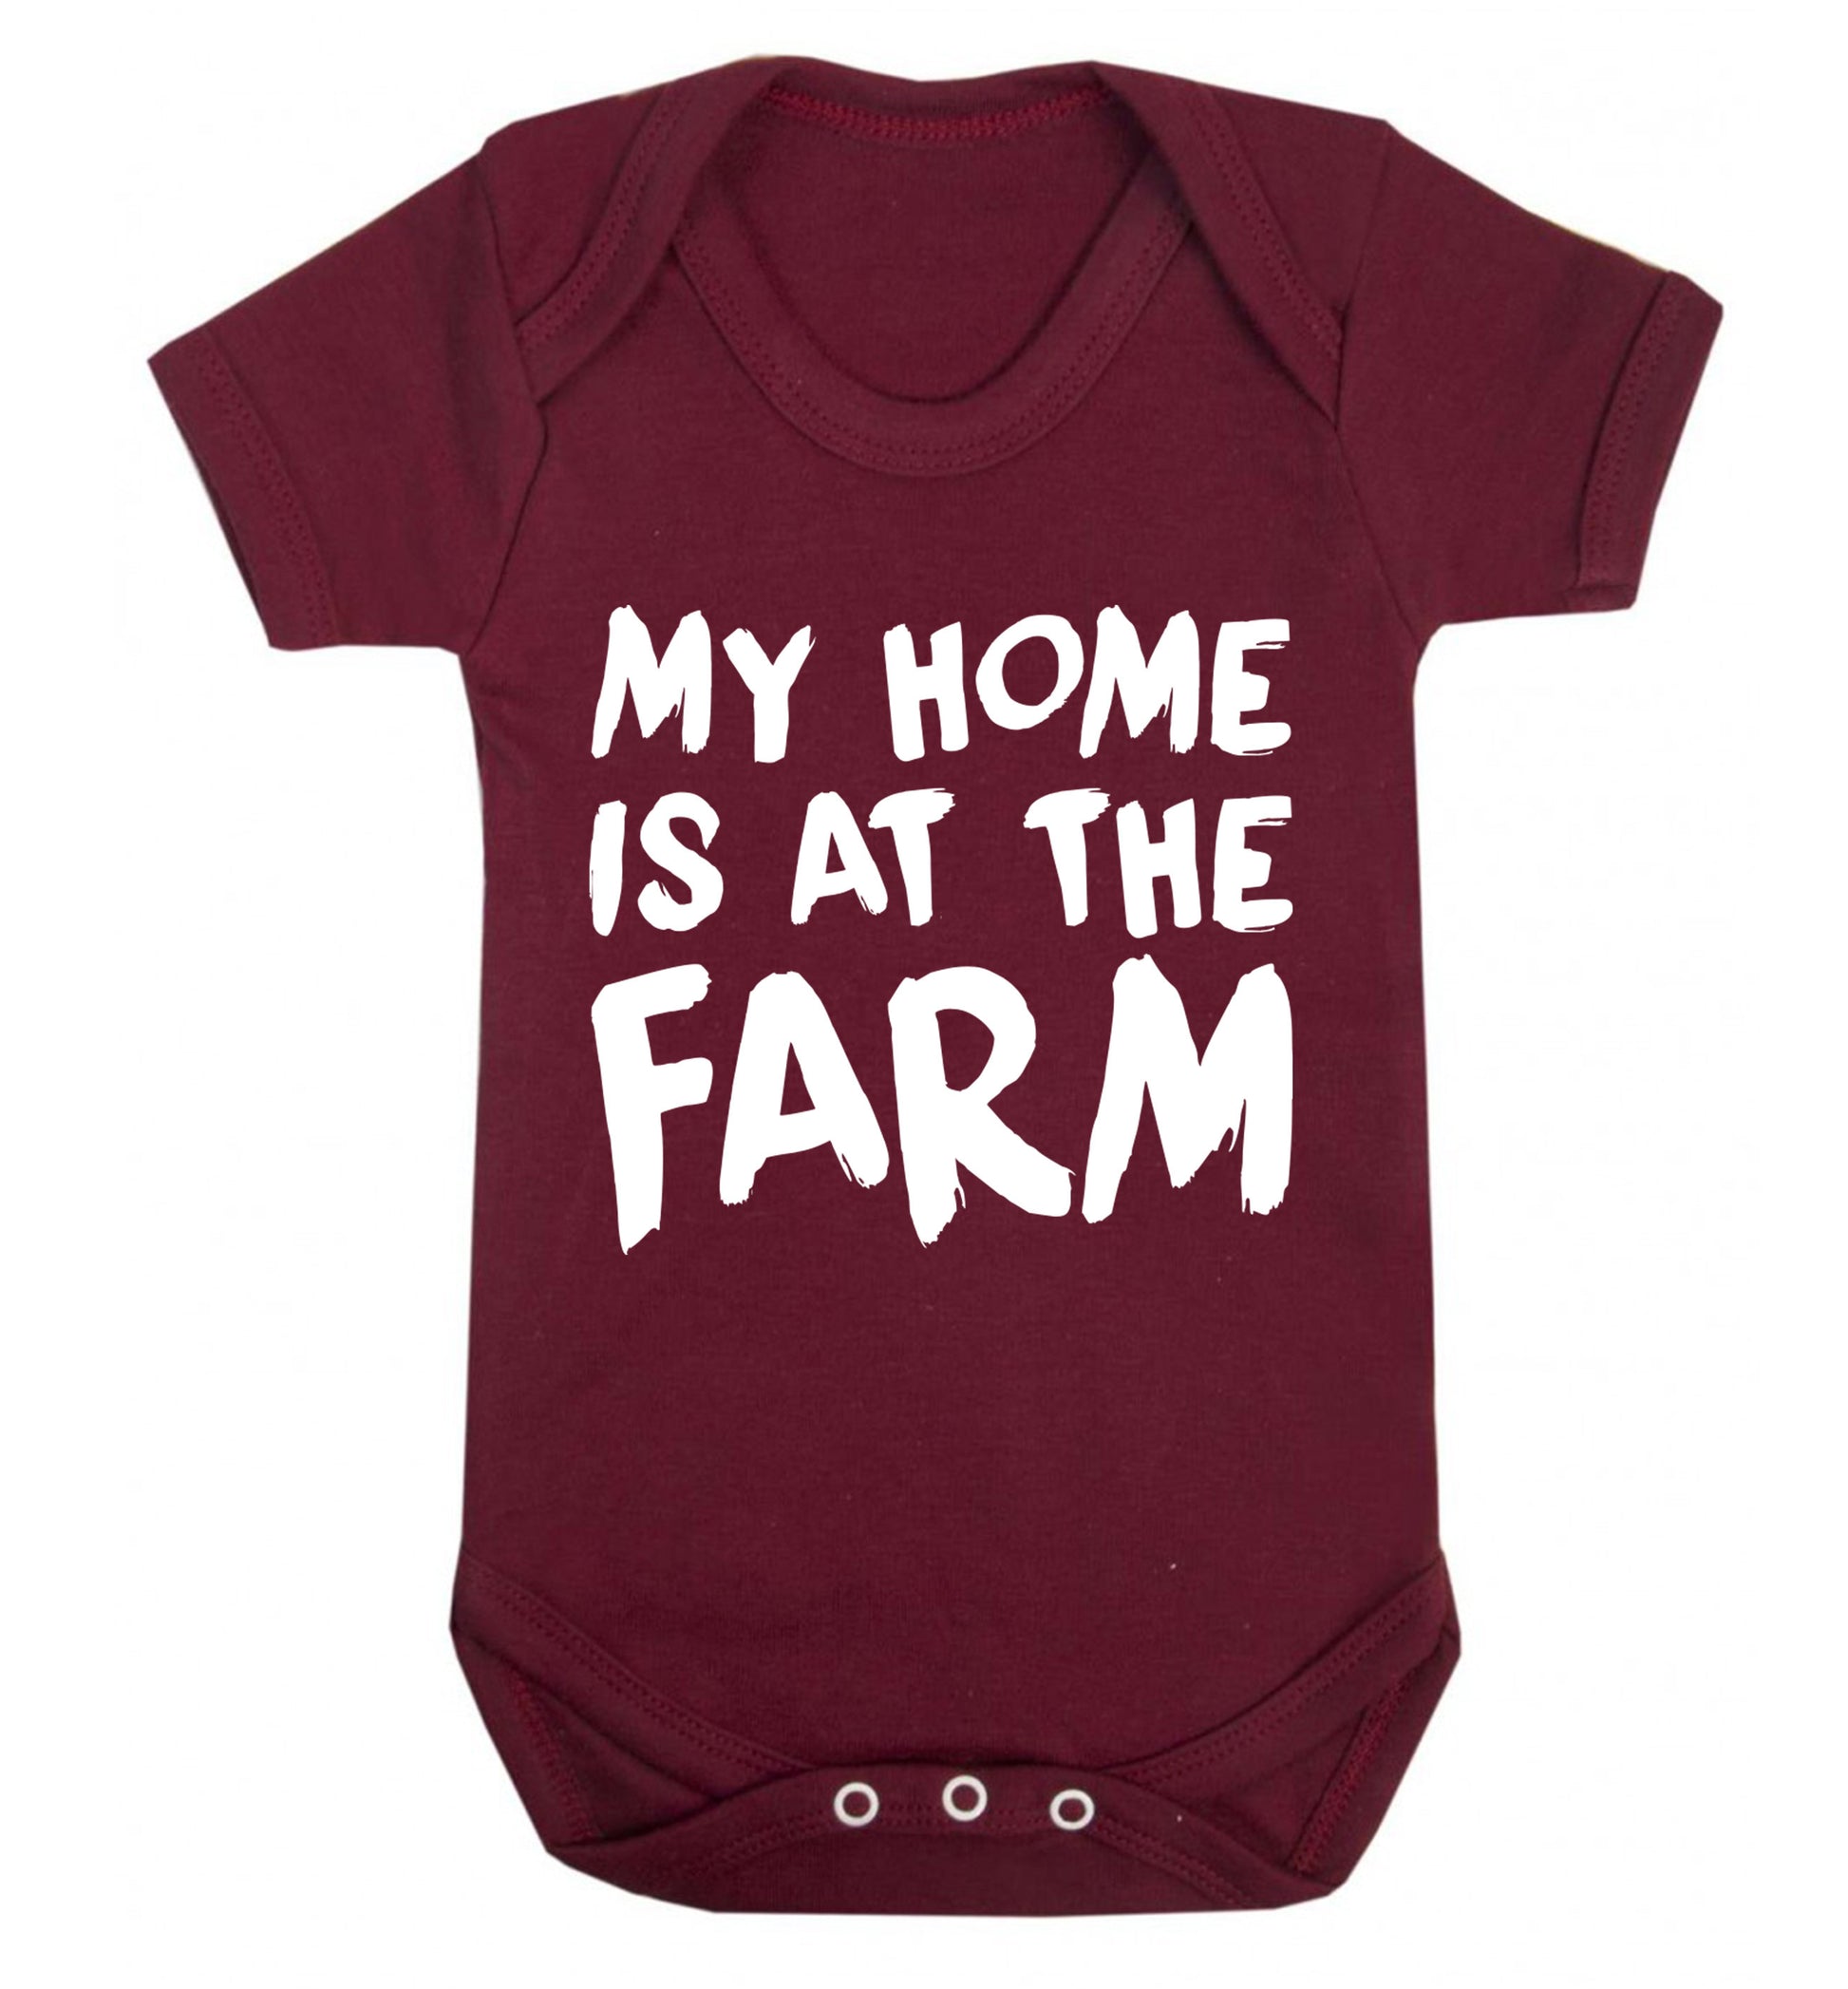 My home is at the farm Baby Vest maroon 18-24 months